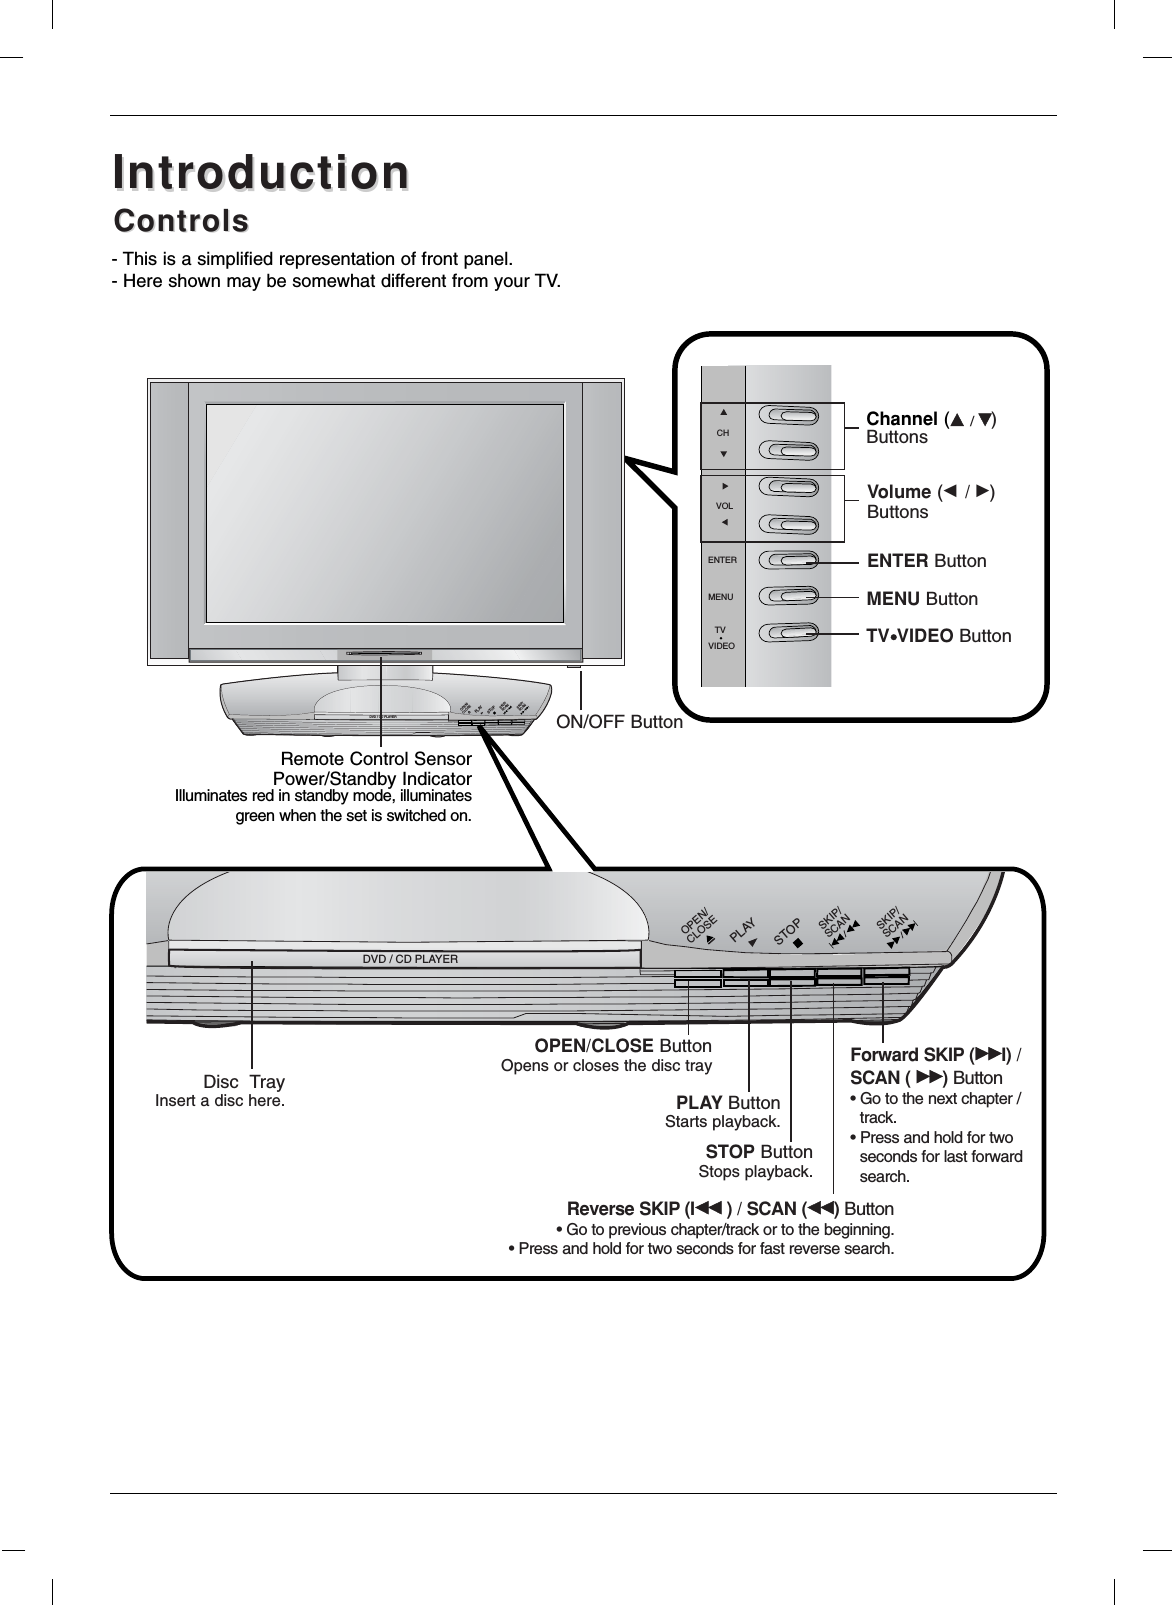 - This is a simplified representation of front panel. - Here shown may be somewhat different from your TV.DVD / CD PLAYERCHVOLENTERMENUTVVIDEOSTOPOPEN/CLOSEPLAYSKIP/SCANSKIP/SCANDVD / CD PLAYERSTOPOPEN/CLOSEPLAYSKIP/SCANSKIP/SCANRemote Control SensorPower/Standby Indicator Illuminates red in standby mode, illuminatesgreen when the set is switched on.Channel (D/E)ButtonsON/OFF ButtonReverse SKIP (IFF ) / SCAN (FF)Button• Go to previous chapter/track or to the beginning.• Press and hold for two seconds for fast reverse search.Forward SKIP (GGI) /SCAN ( GG)Button• Go to the next chapter /track.• Press and hold for twoseconds for last forwardsearch.STOP ButtonStops playback.PLAY ButtonStarts playback.OPEN/CLOSE ButtonOpens or closes the disc trayDisc  TrayInsert a disc here.Volume (F /G)ButtonsENTER ButtonMENU ButtonTVvVIDEO ButtonControlsControlsIntroductionIntroduction